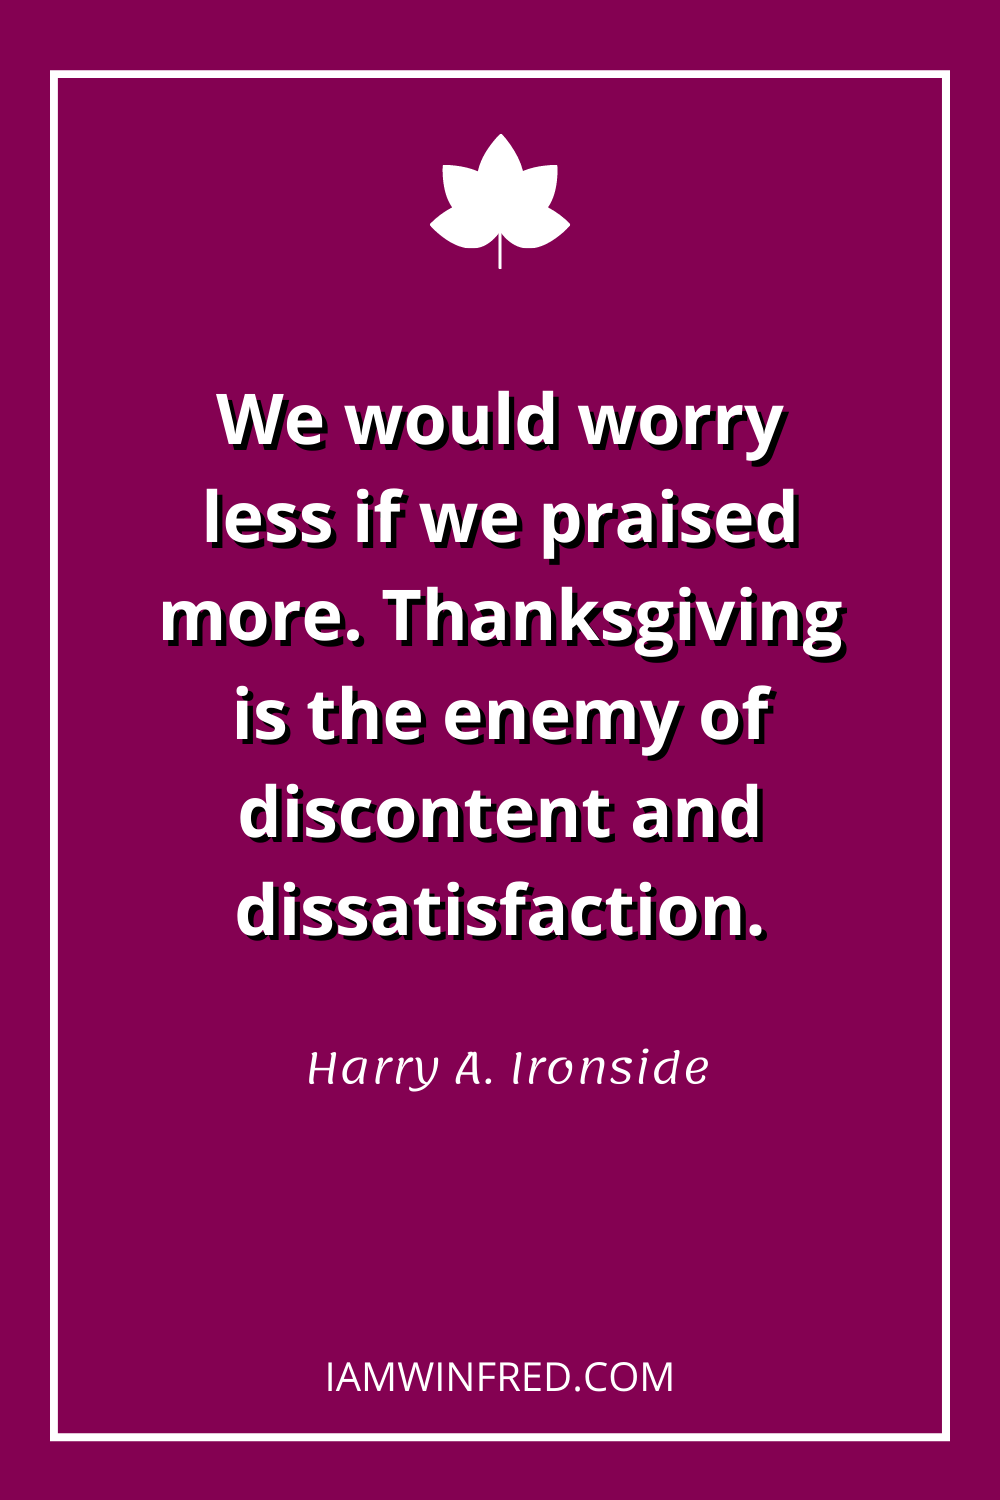 We Would Worry Less If We Praised More. Thanksgiving Is The Enemy Of Discontent And Dissatisfaction